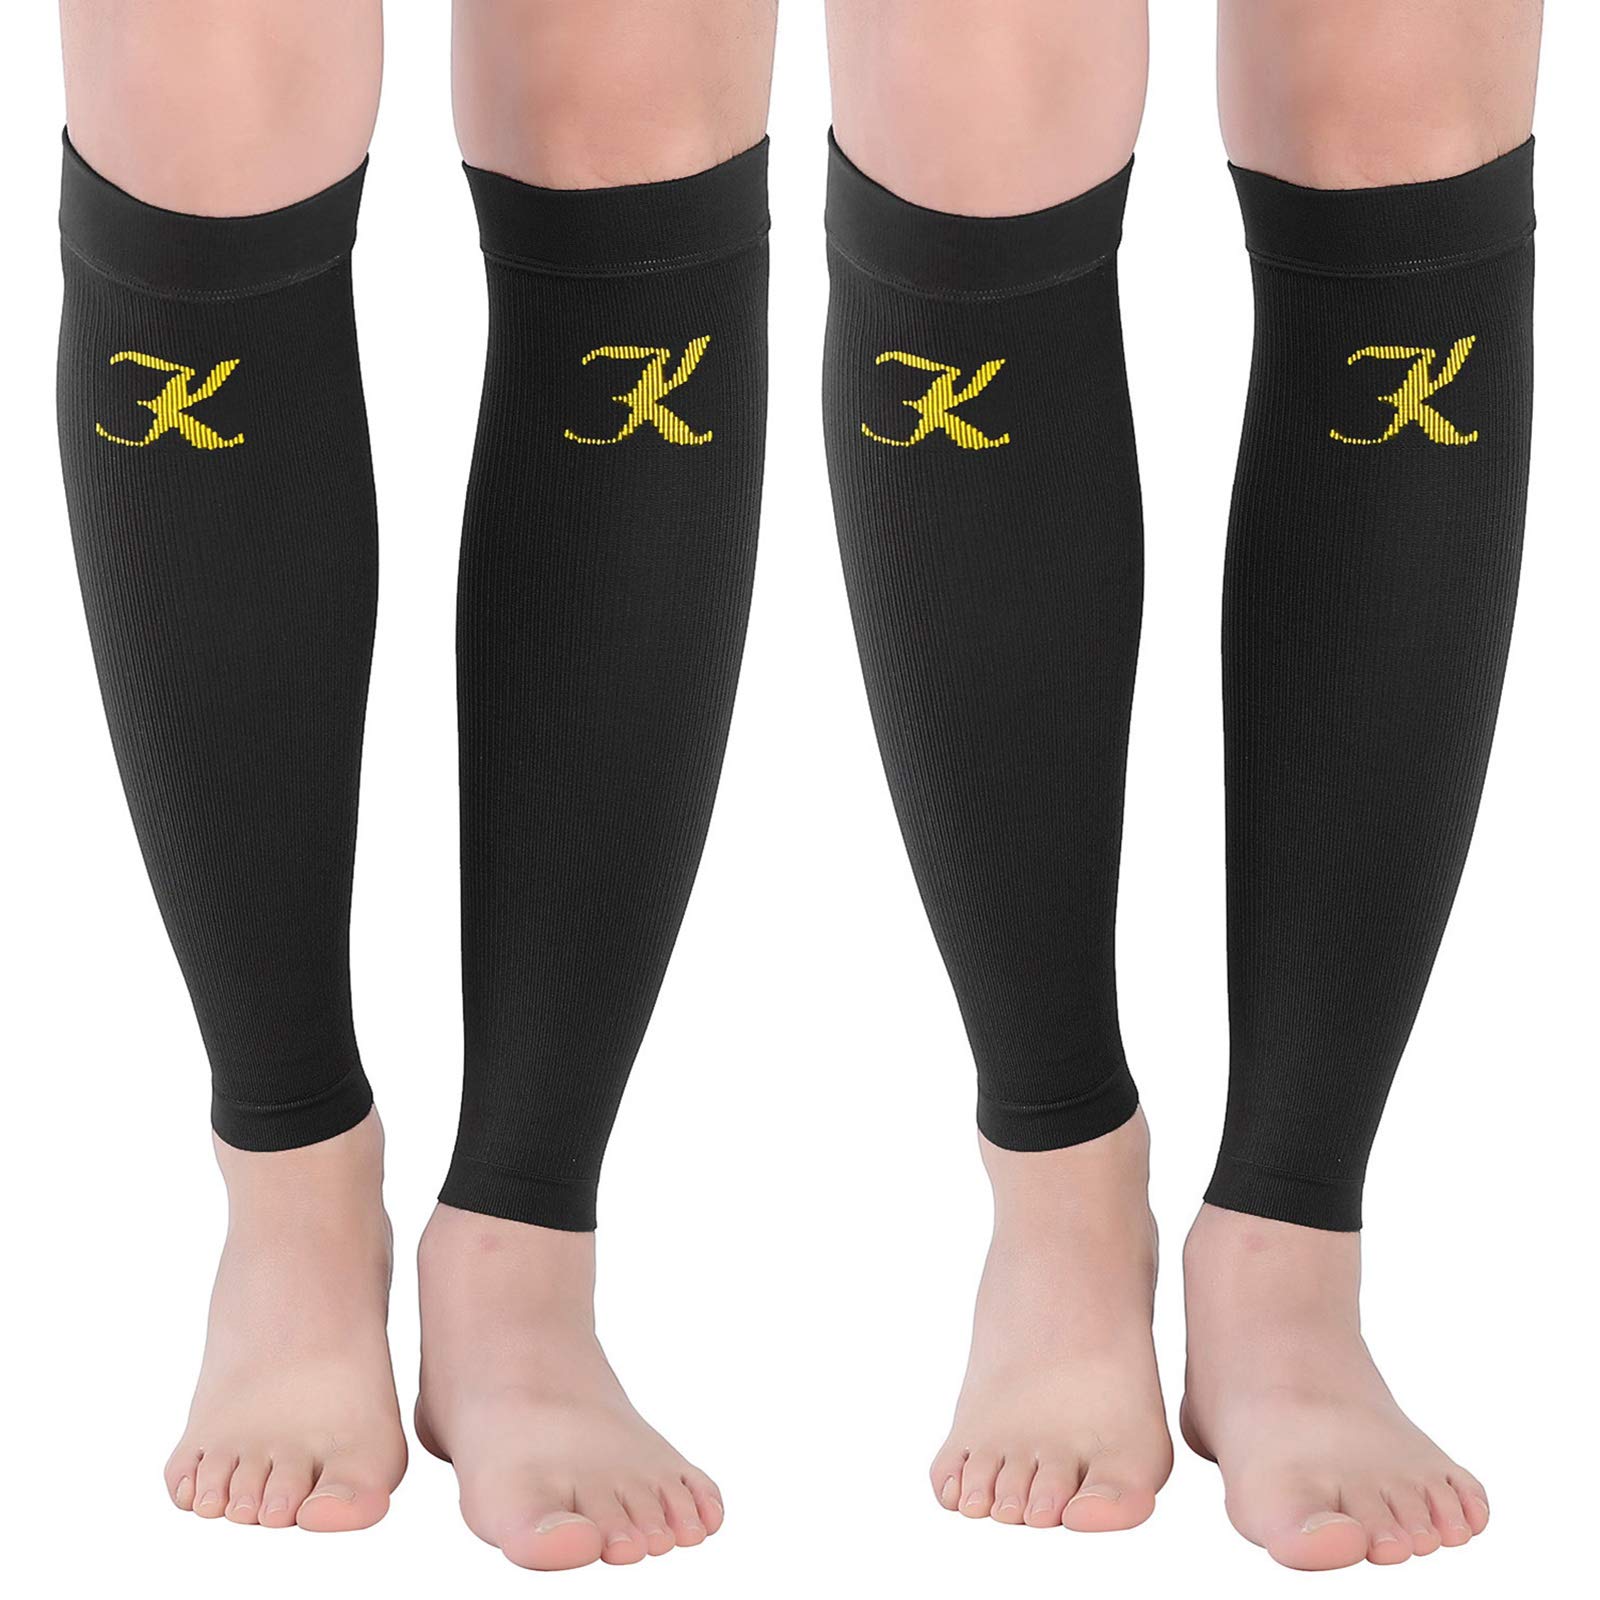 Why Are Compression Socks and Sleeves Good for Calf Pain? - Run